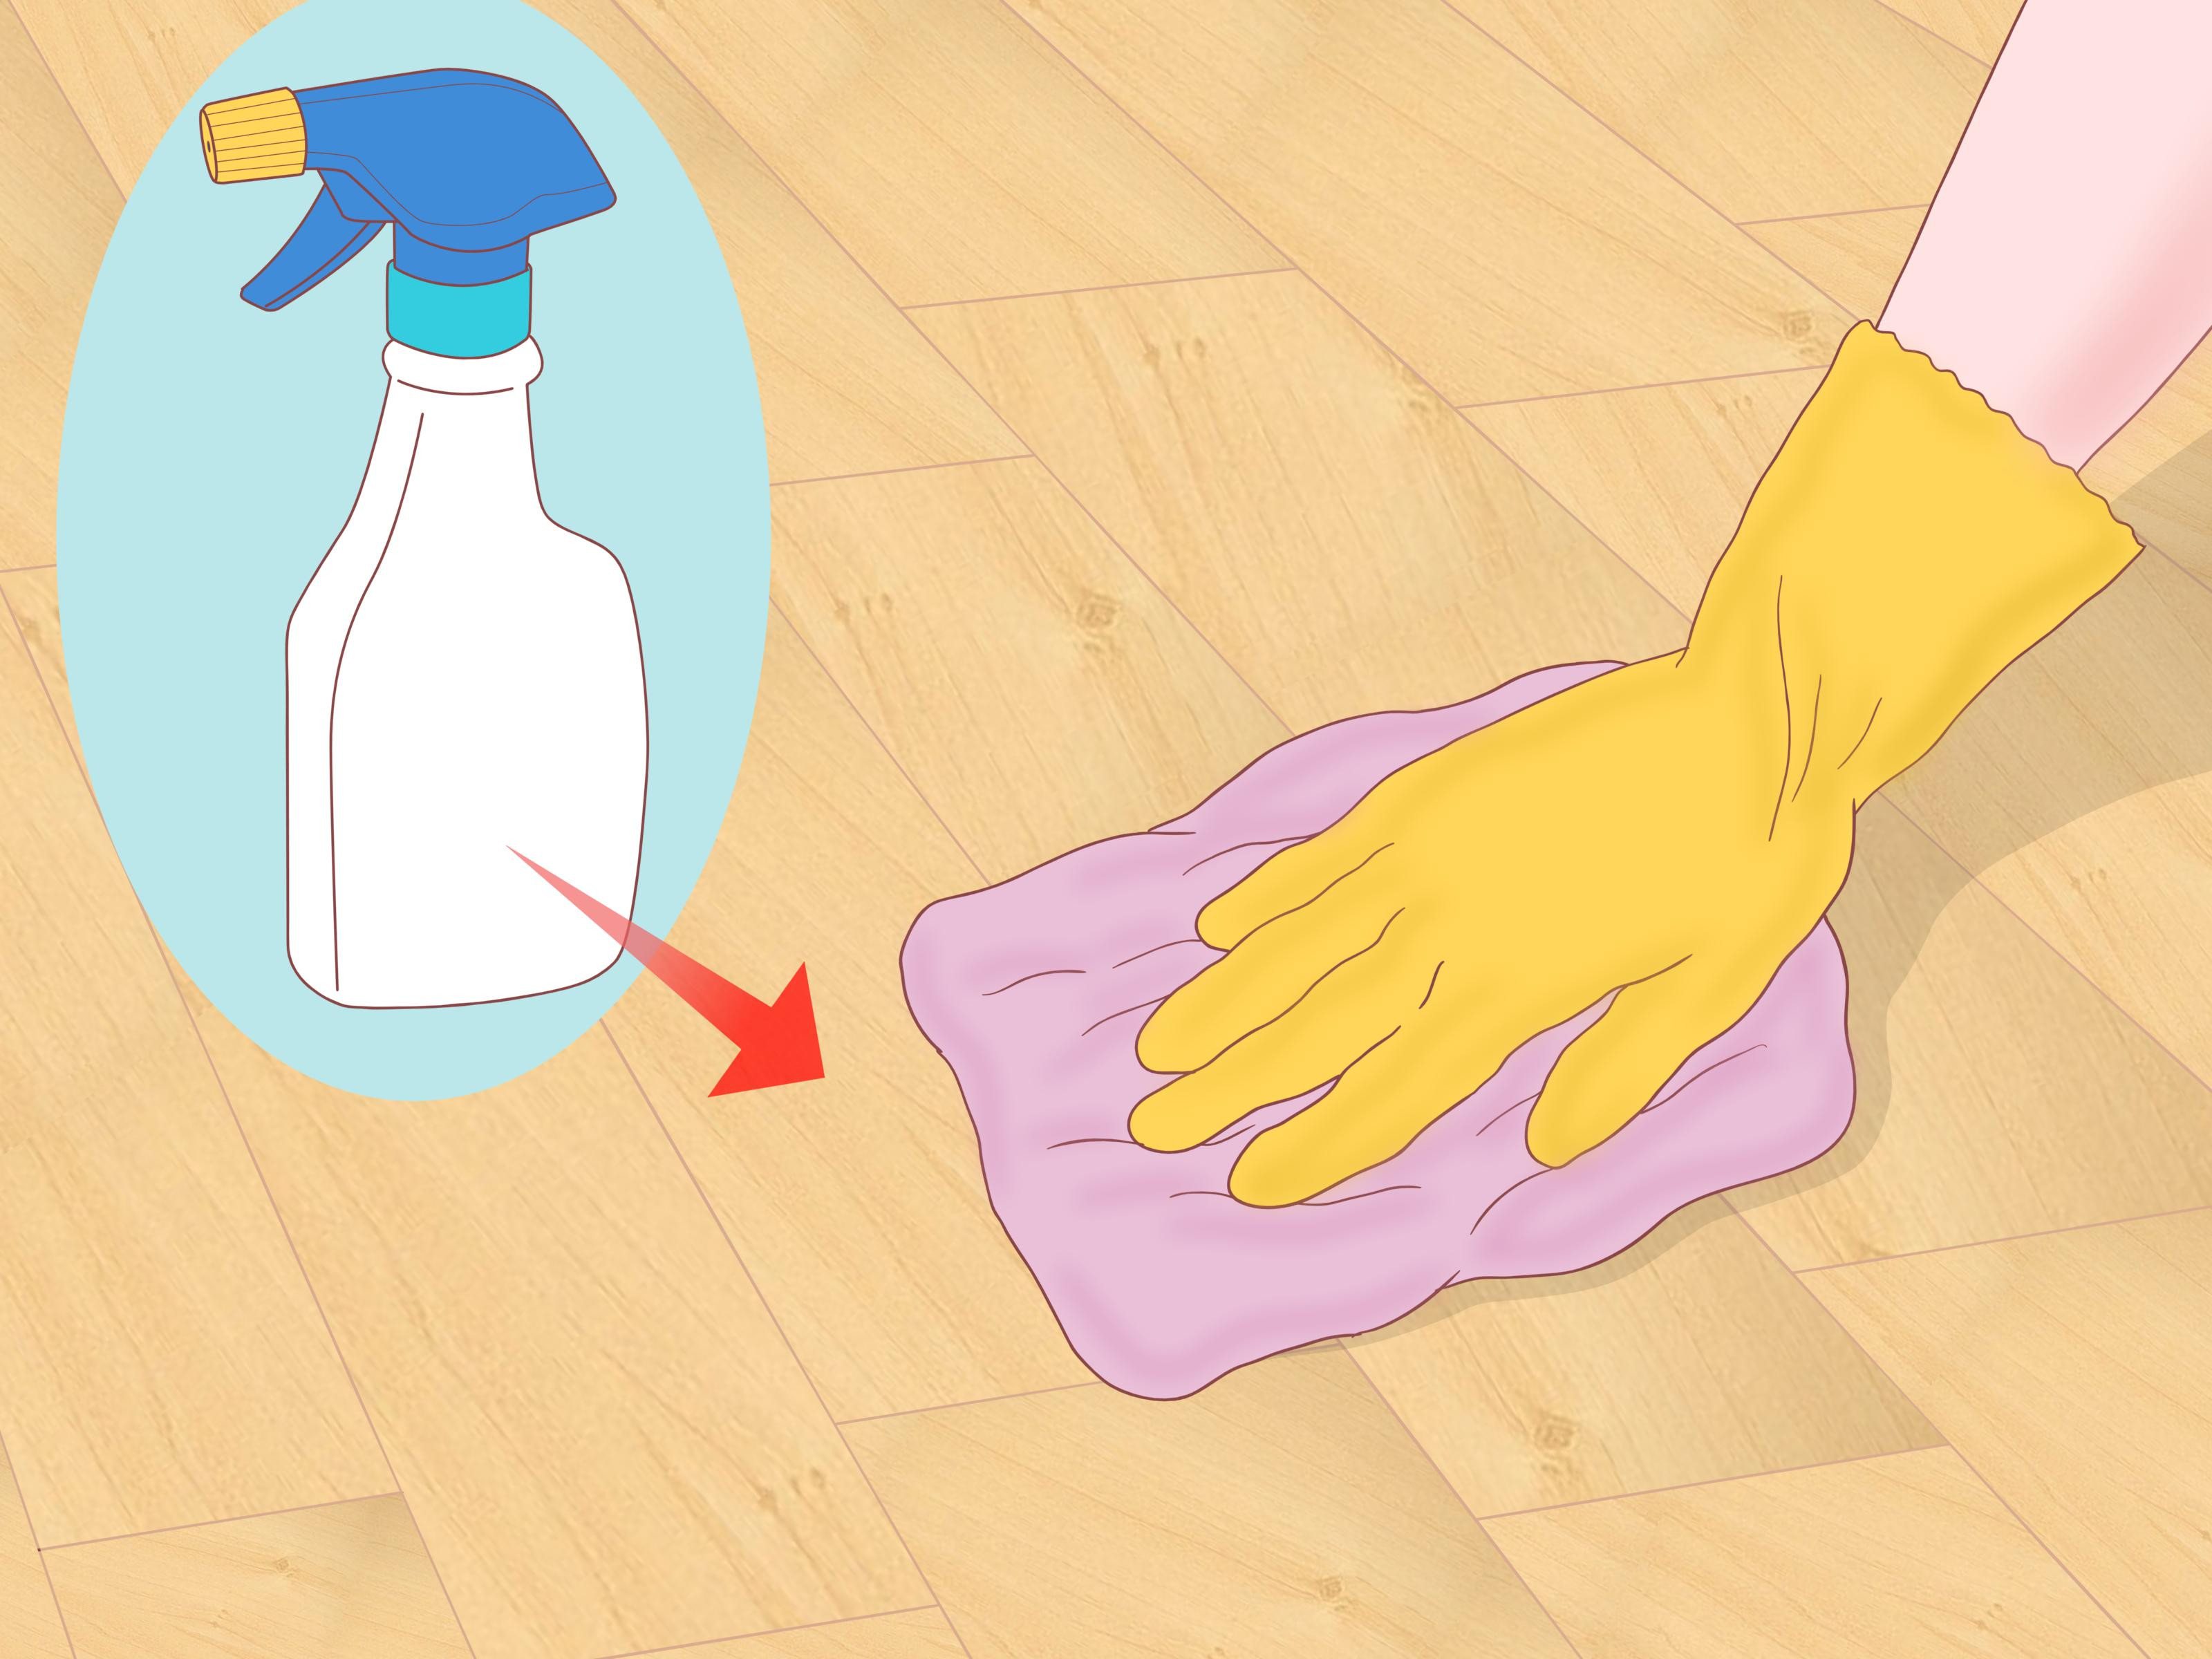 17 Nice Hardwood Floor Cleaning with White Vinegar 2024 free download hardwood floor cleaning with white vinegar of 3 ways to clean parquet floors wikihow throughout clean parquet floors step 12